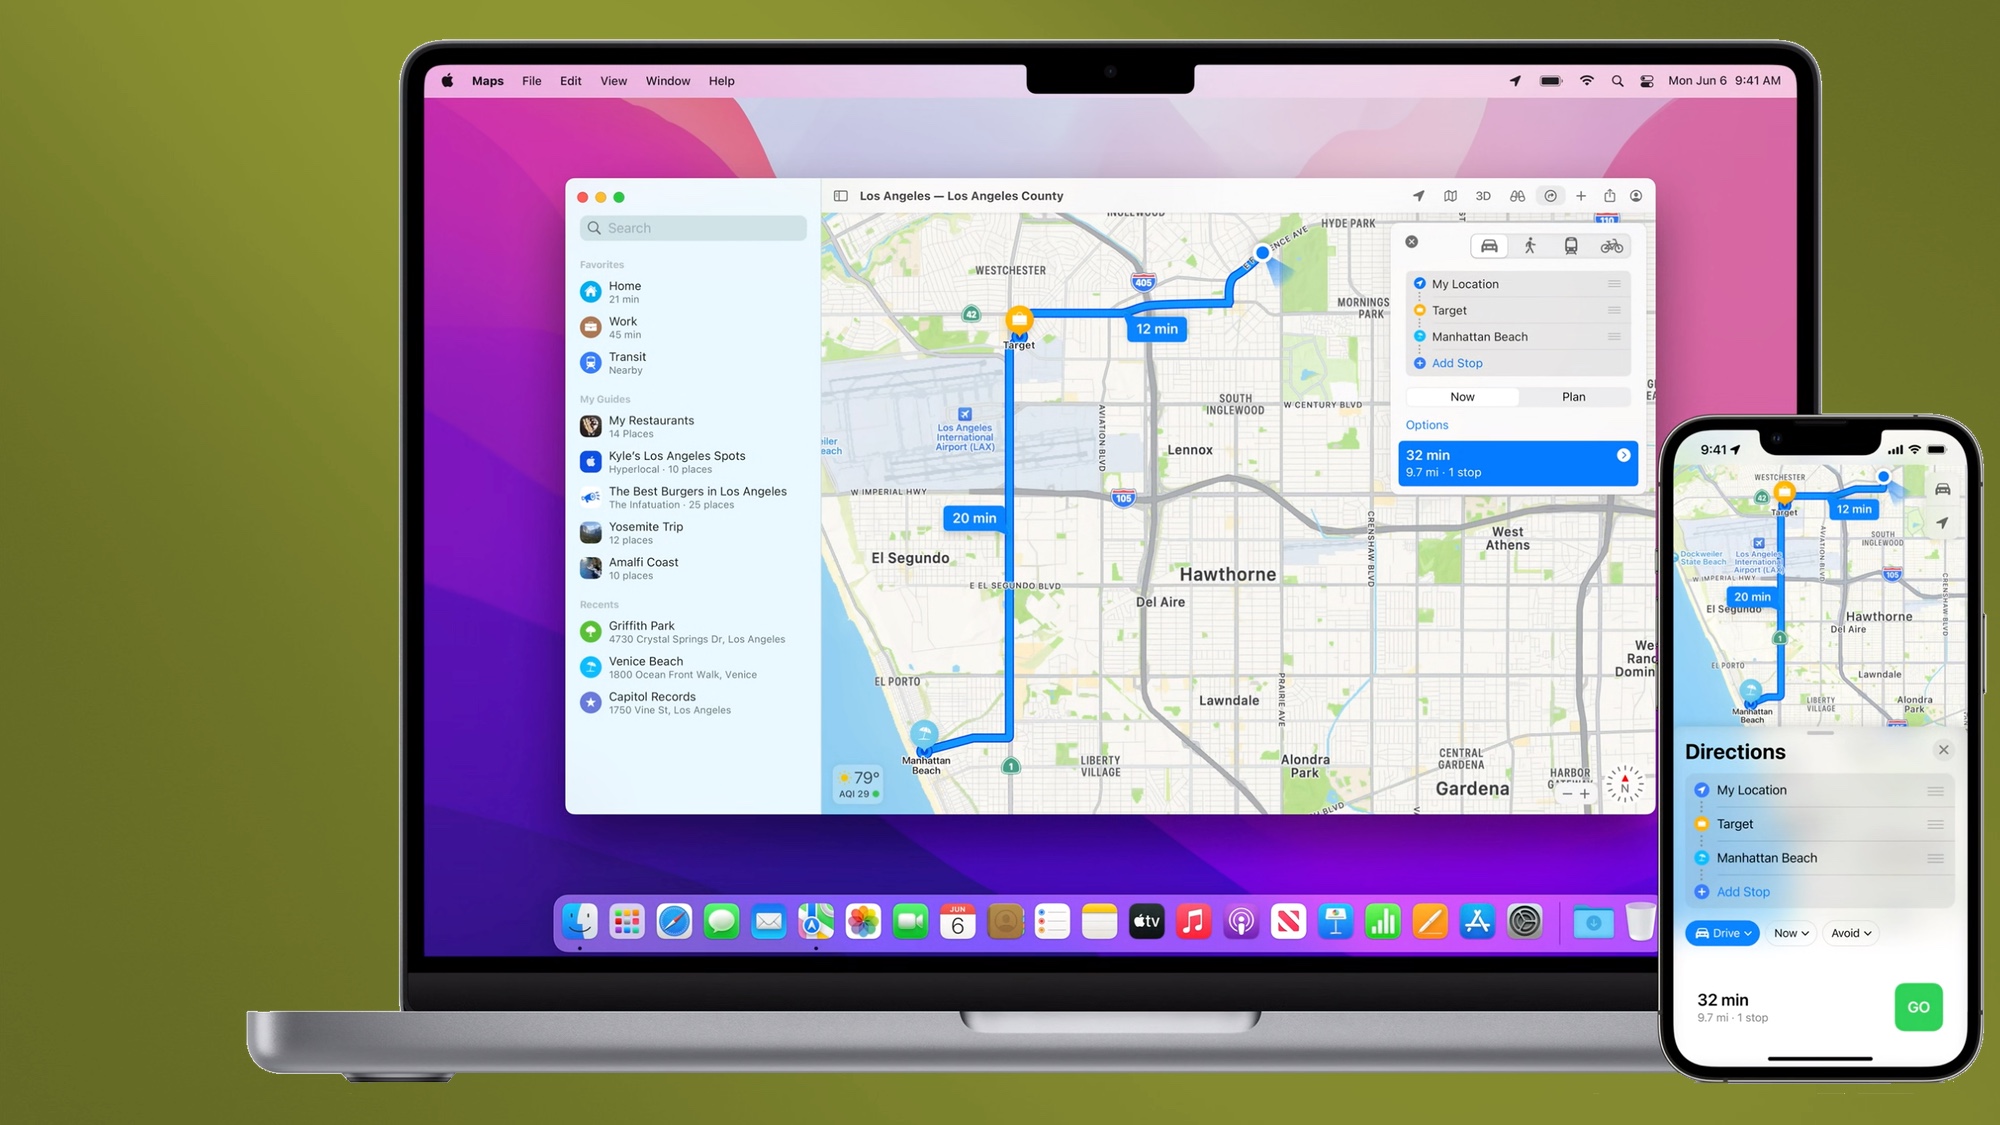 ios 16 maps on both iPhone and macbook